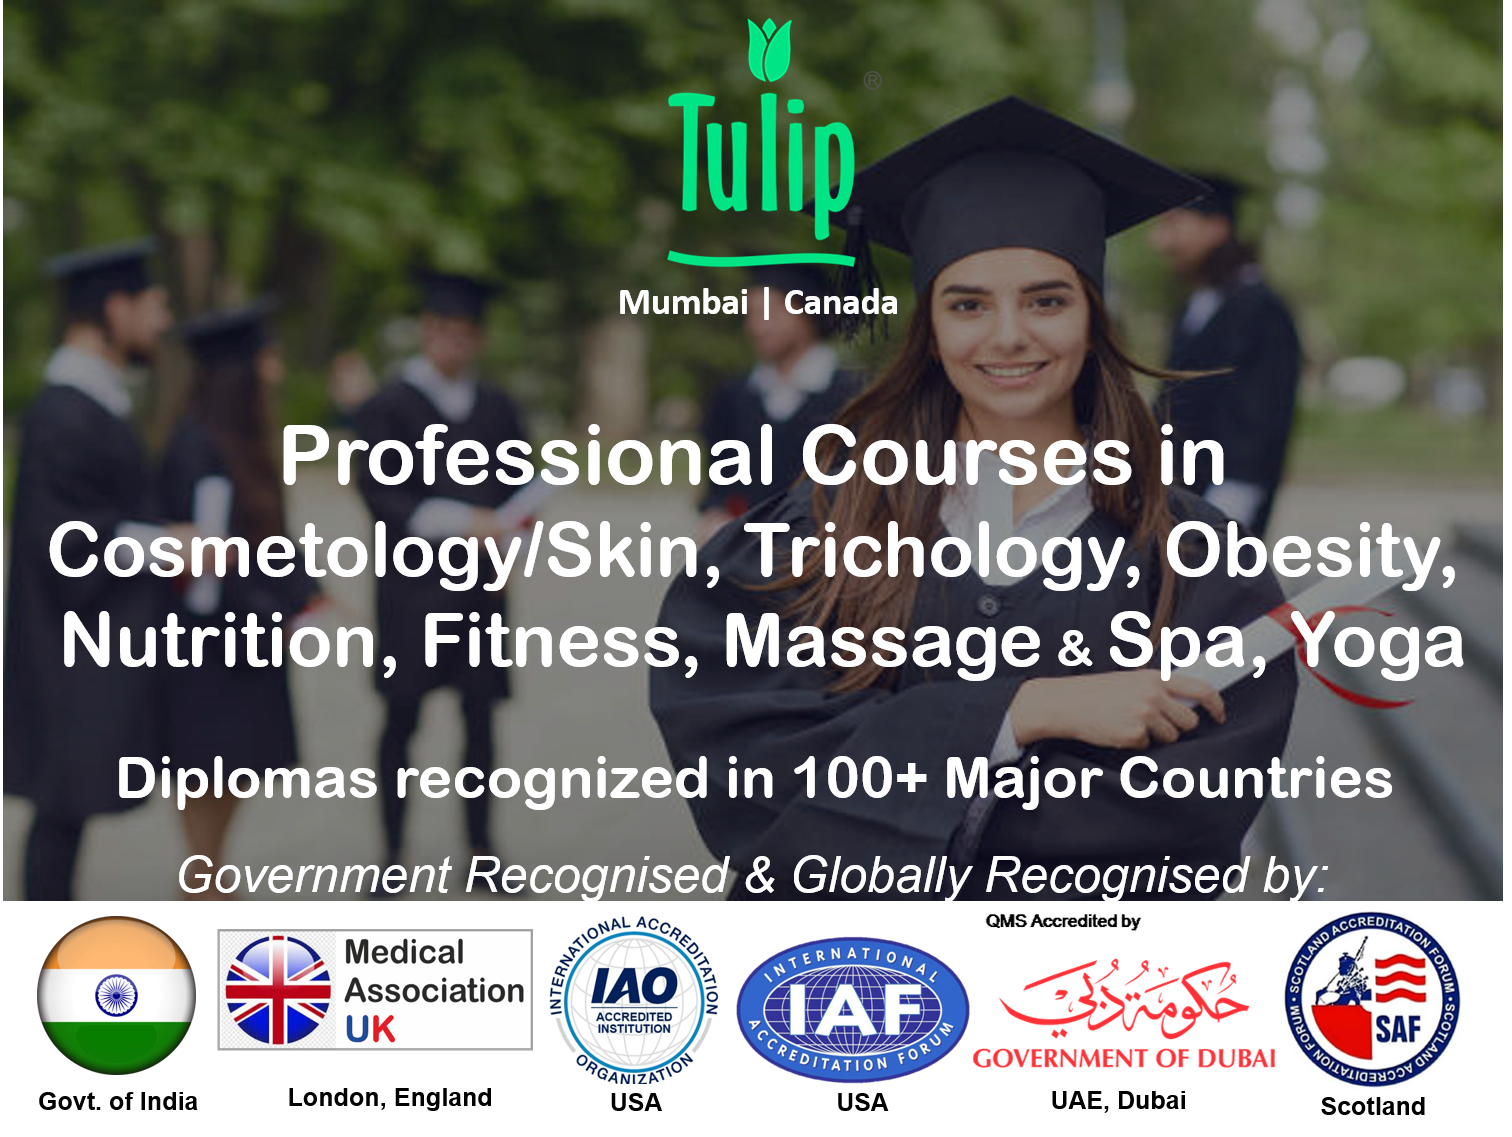 Tulip International - Registered by Government of India.  Accredited by Government of Dubai (UAE).   Registered by Medical Association of U.K.  Affiliation & Accreditation is from Australia, America (USA), UAE, London, Scotland.  Tulip Diploma is recognised in India and in all major countries of the world.  Proudly become an Internationally Accredited Professional with Tulip’s Diploma. International PG Diploma in Clinical Cosmetology, Trichology, Nutrition, Diet Planning, Fitness, Massage & Spa.